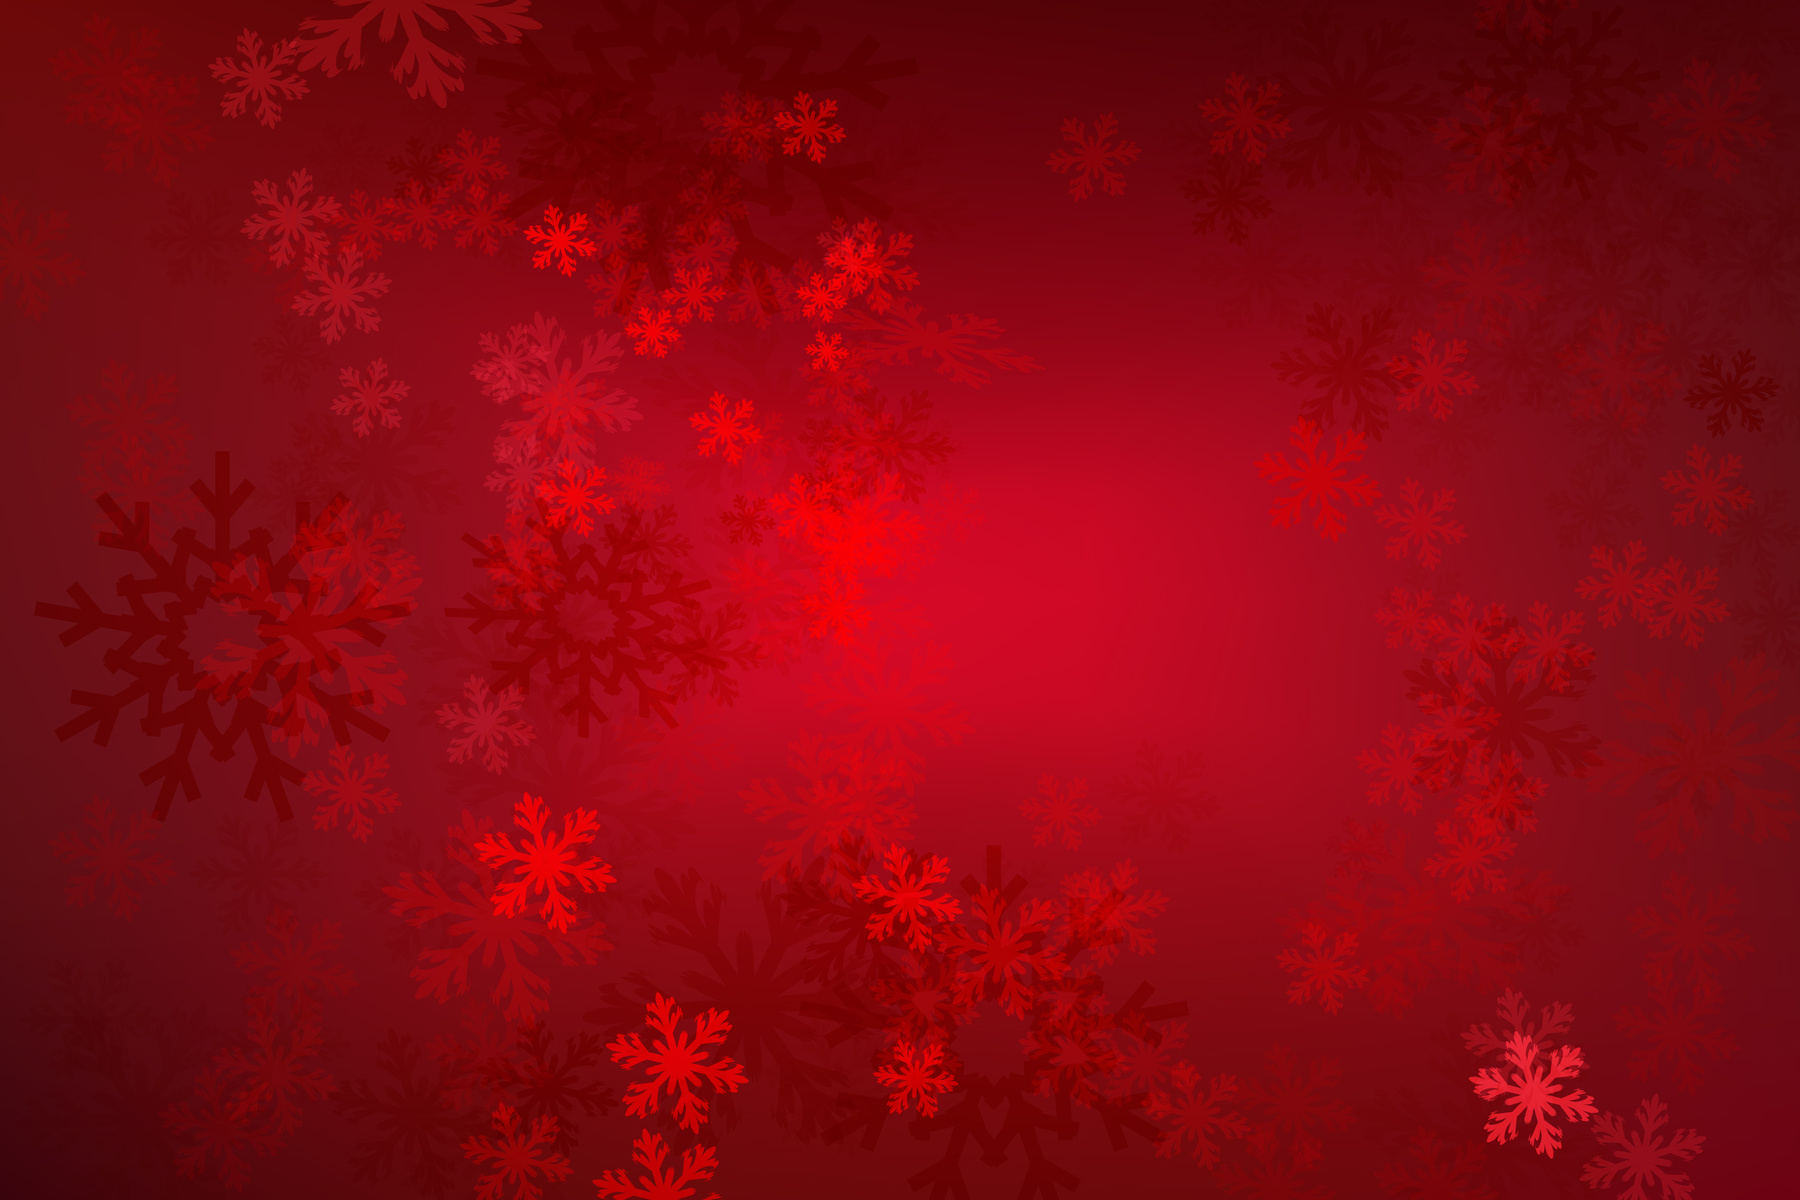 Red Snowflakes Background